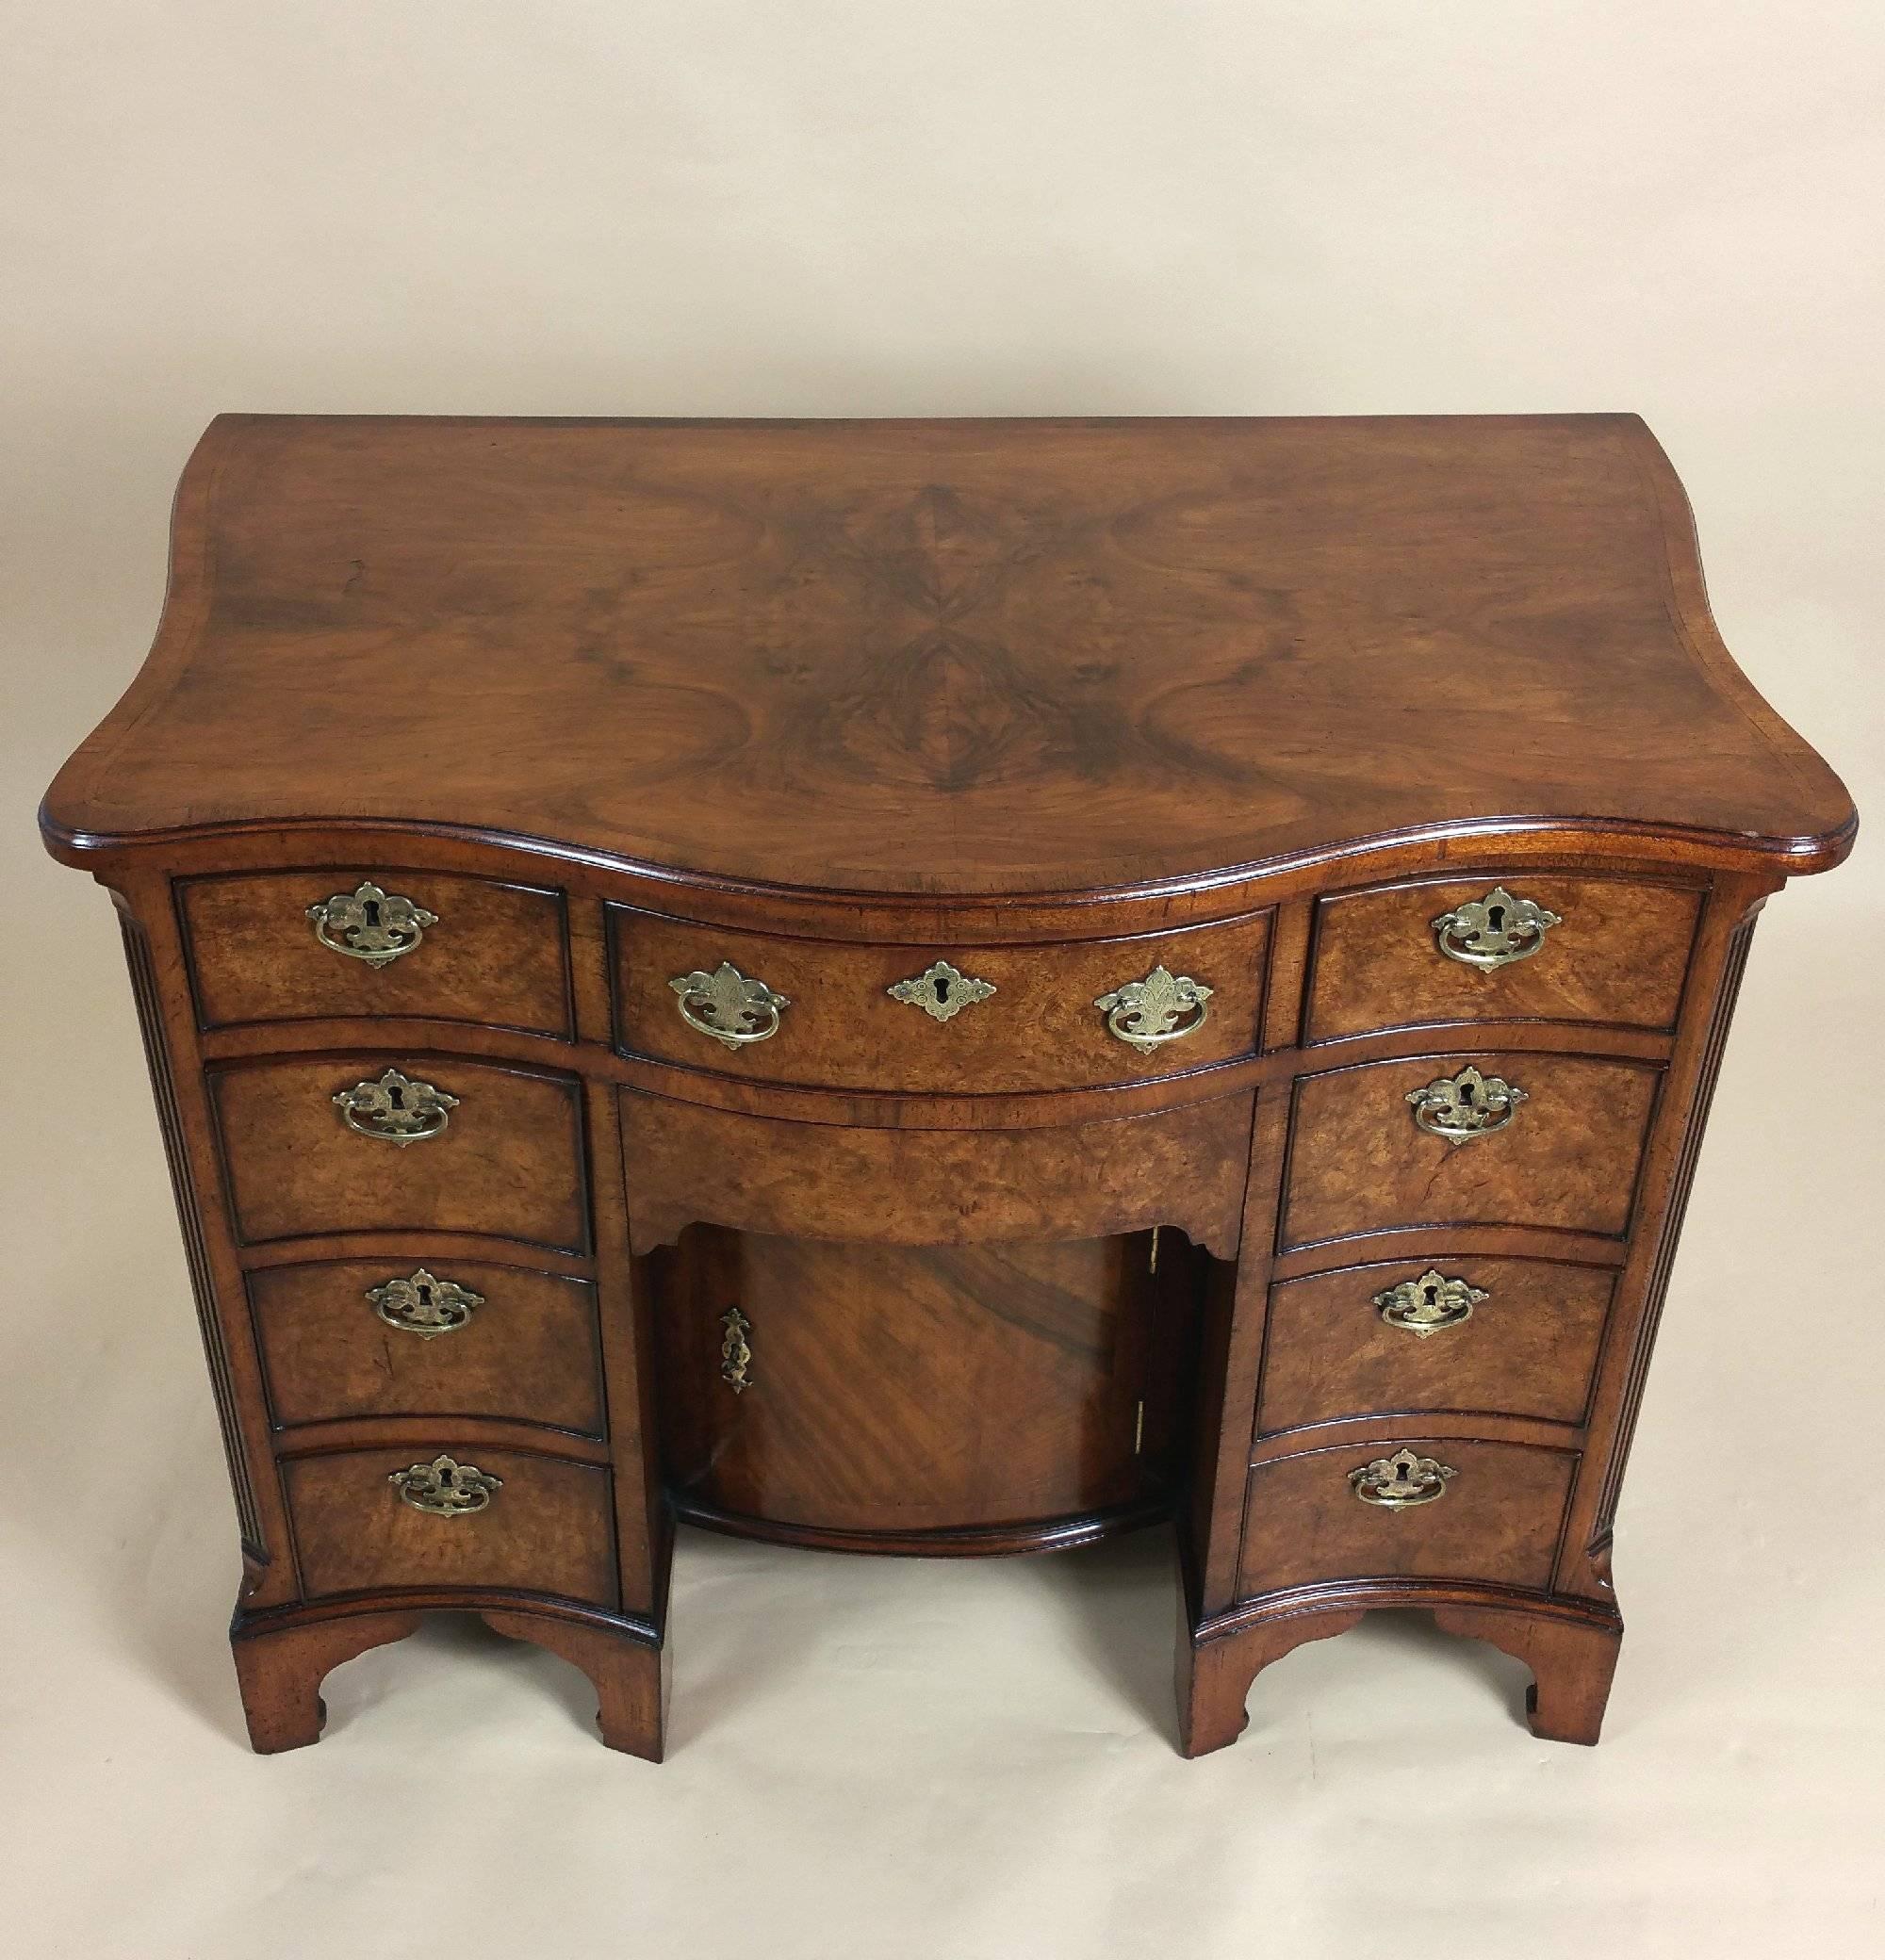 This gorgeous late 19th century figured walnut George I style kneehole desk is fitted with four graduating drawers on each side and a central drawer with a napery drawer beneath. The bow fronted desk features a kneehole set back cupboard, with